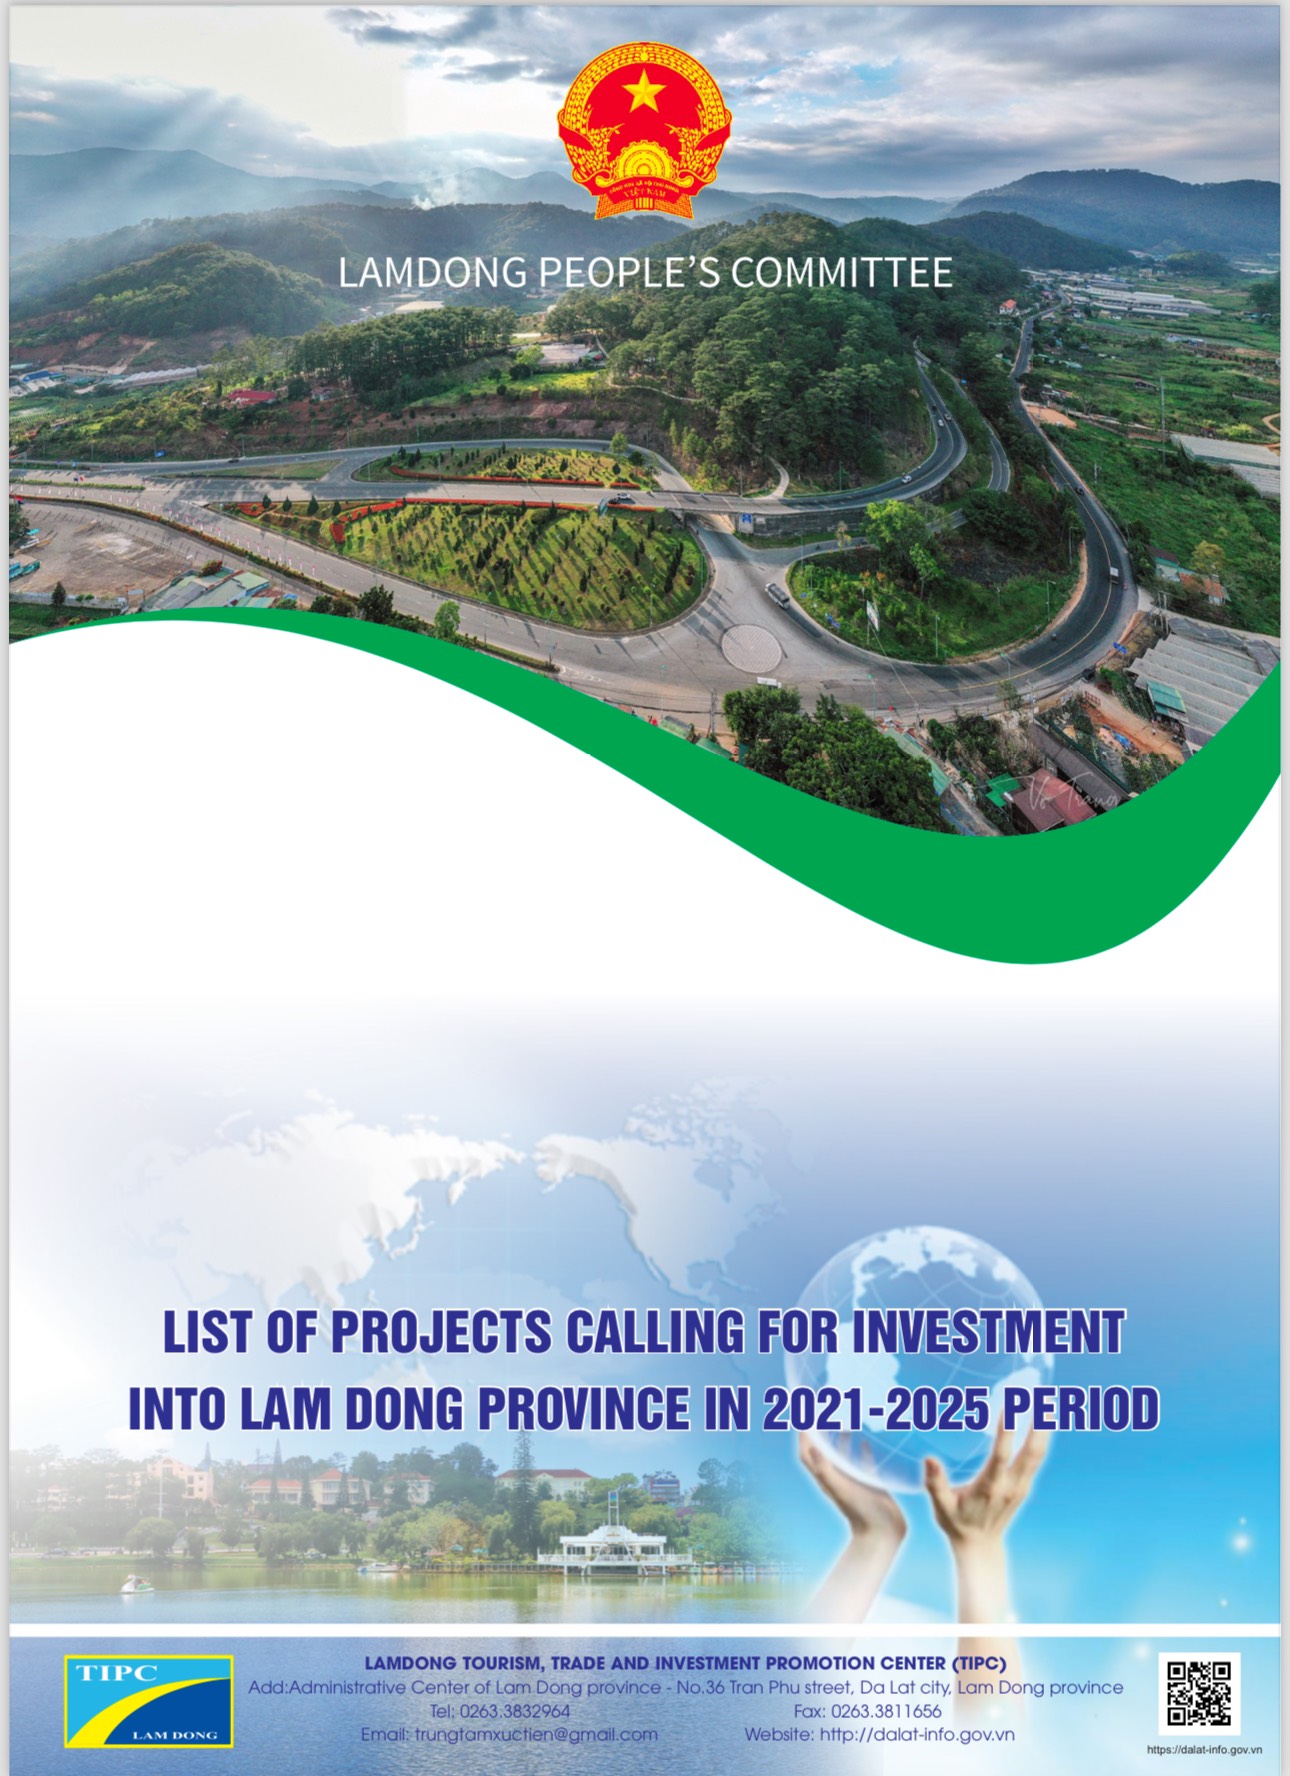 LIST OF PROJECTS CALLING FOR INVESTMENT  INTO LAM DONG PROVINCE IN 2021-2025 PERIOD